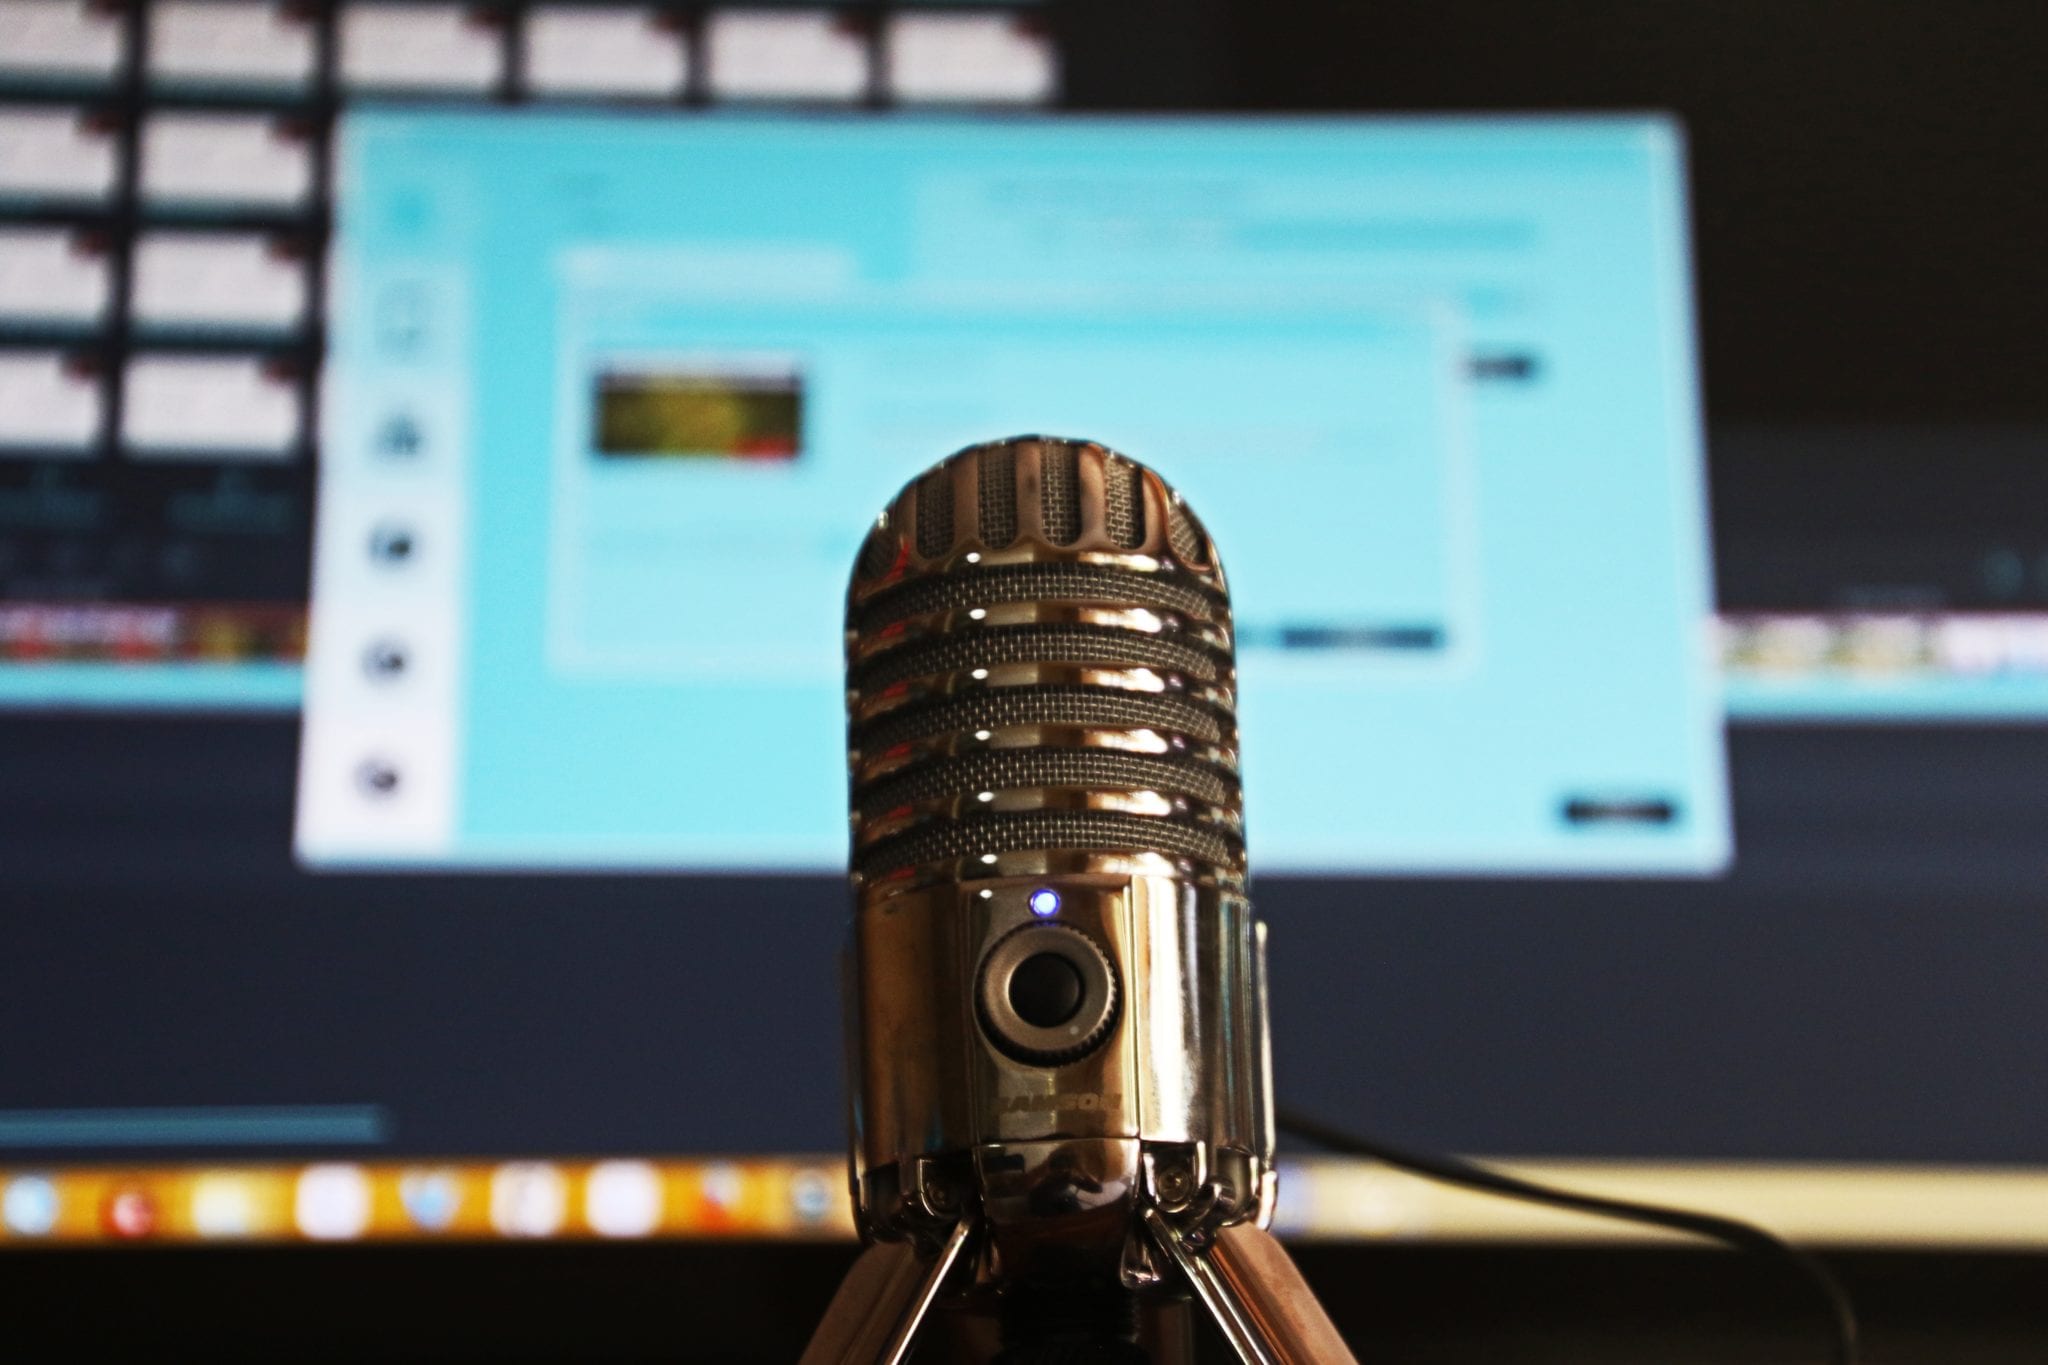 microphone in front of a computer monitor